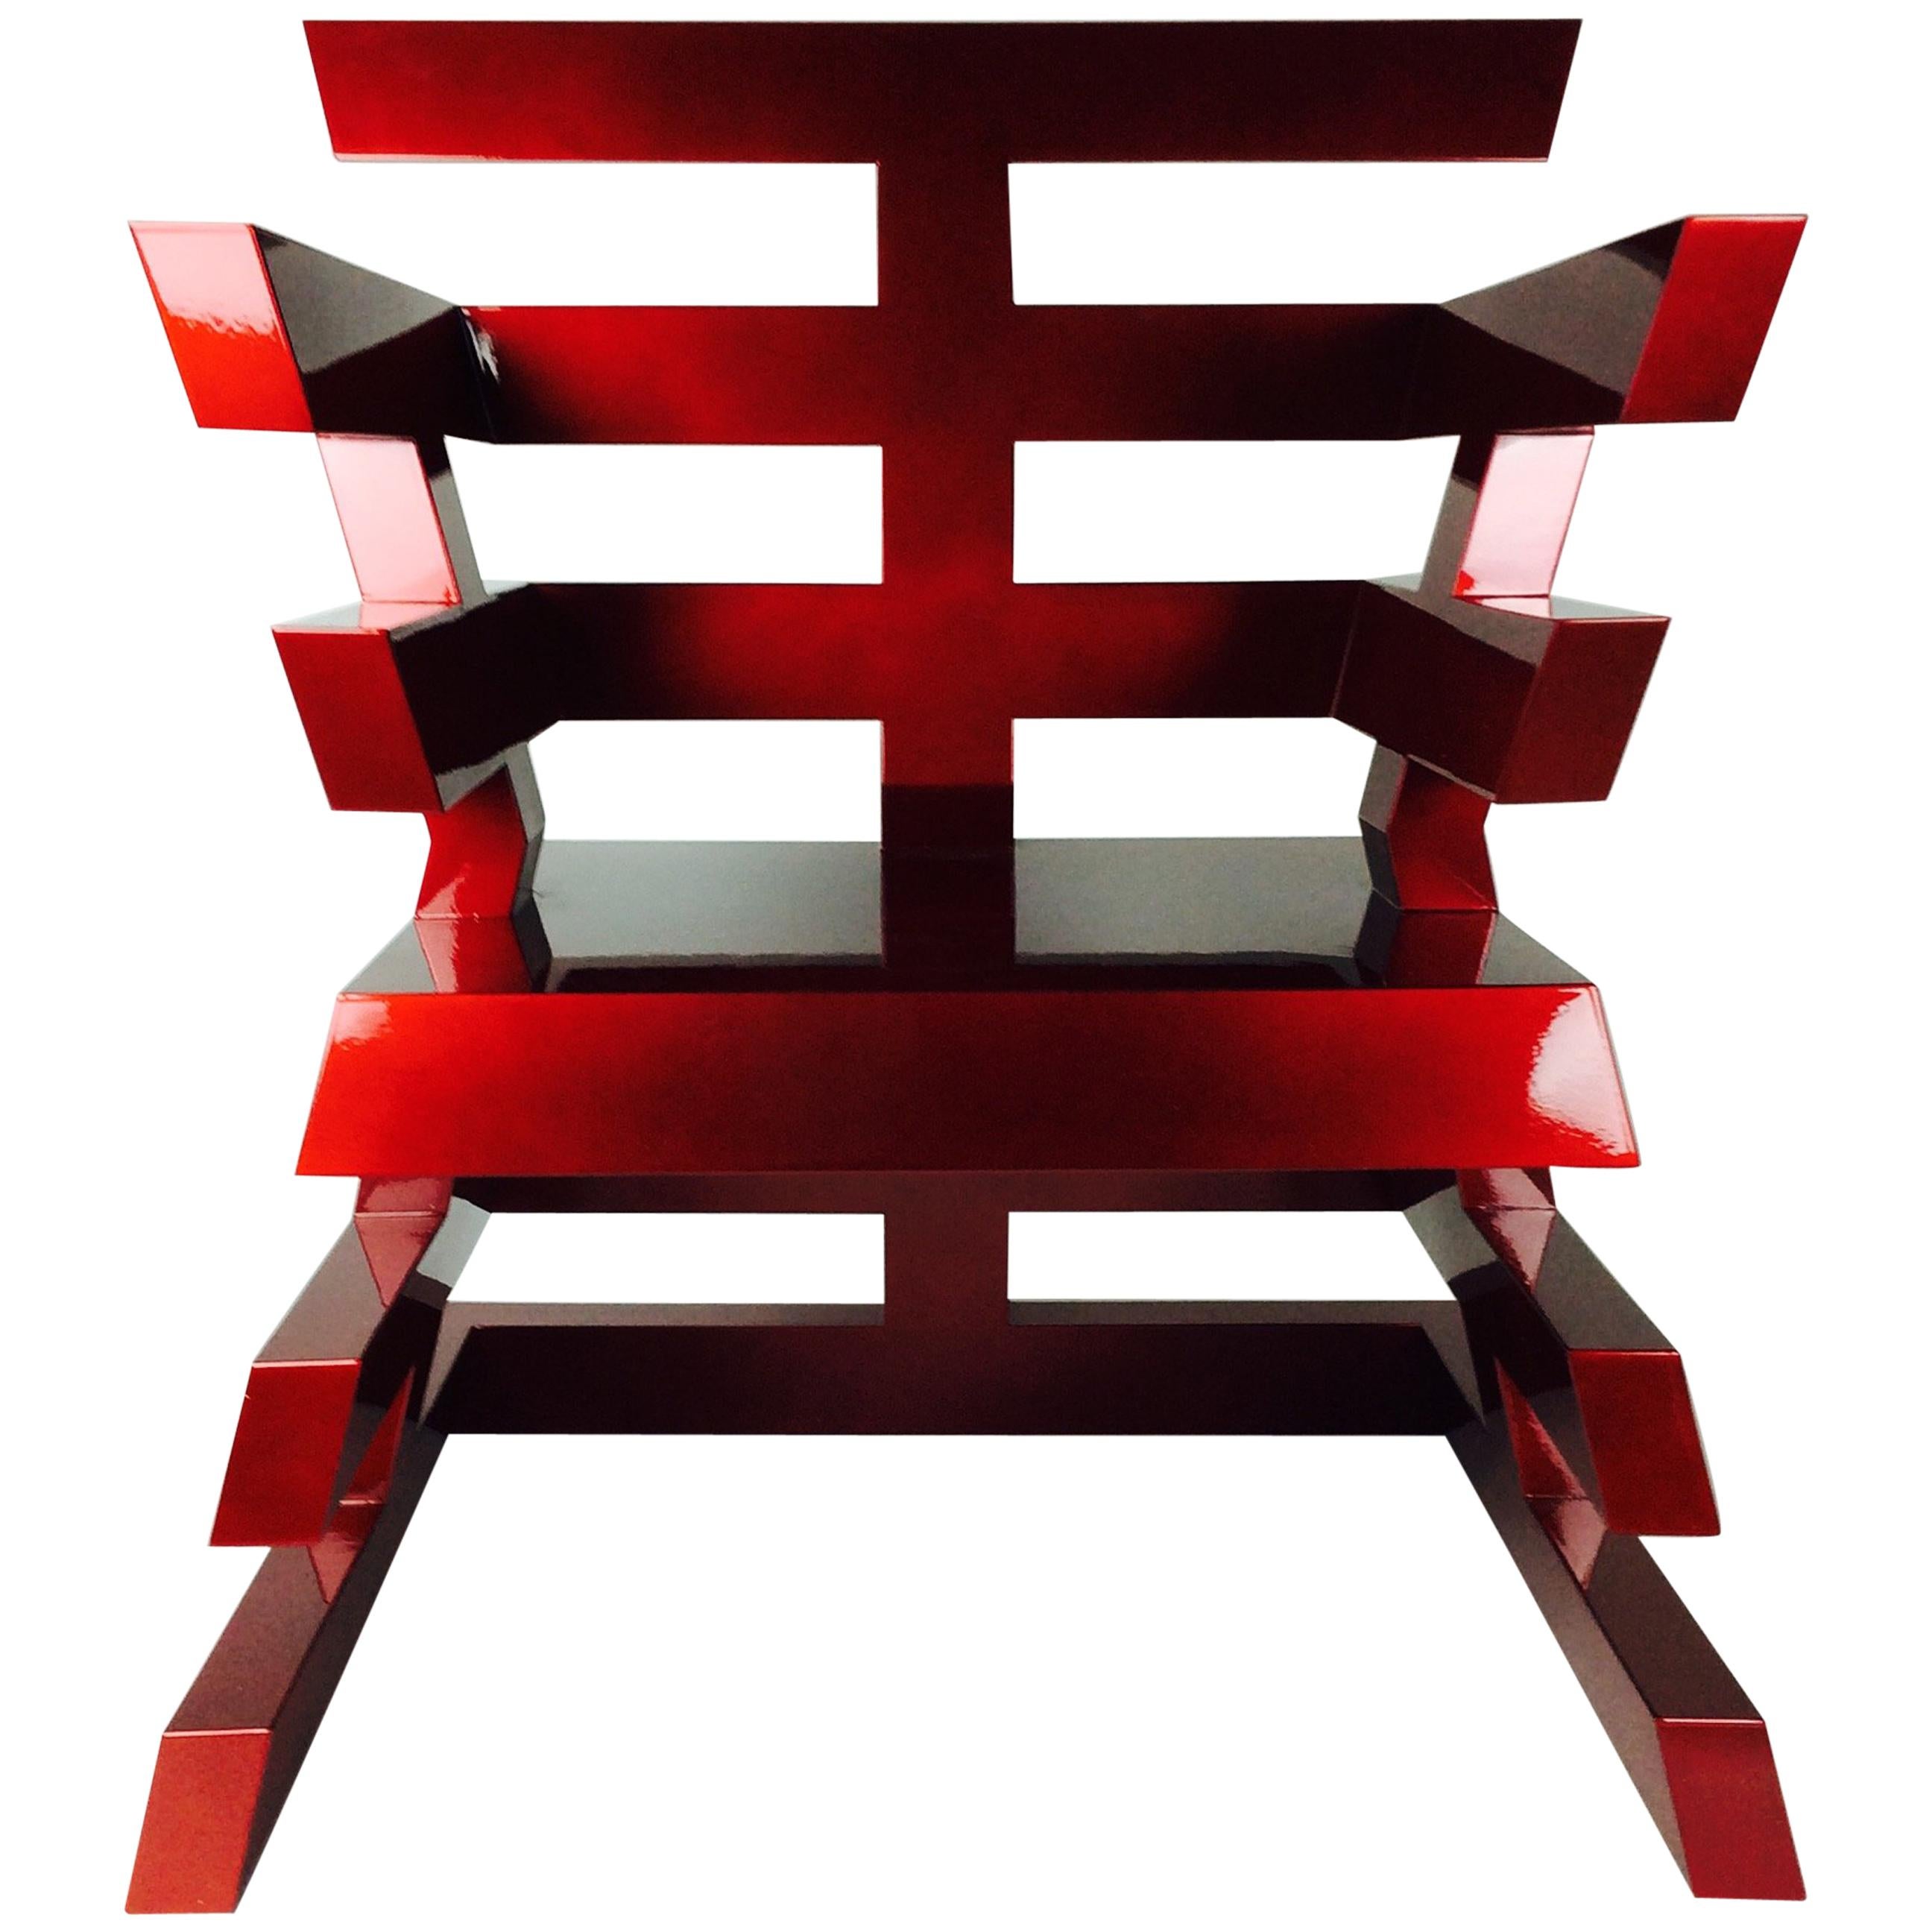 Nicholas Alvis Vega’s Iconic Brass Aztec Chair in Fierce Red For Sale